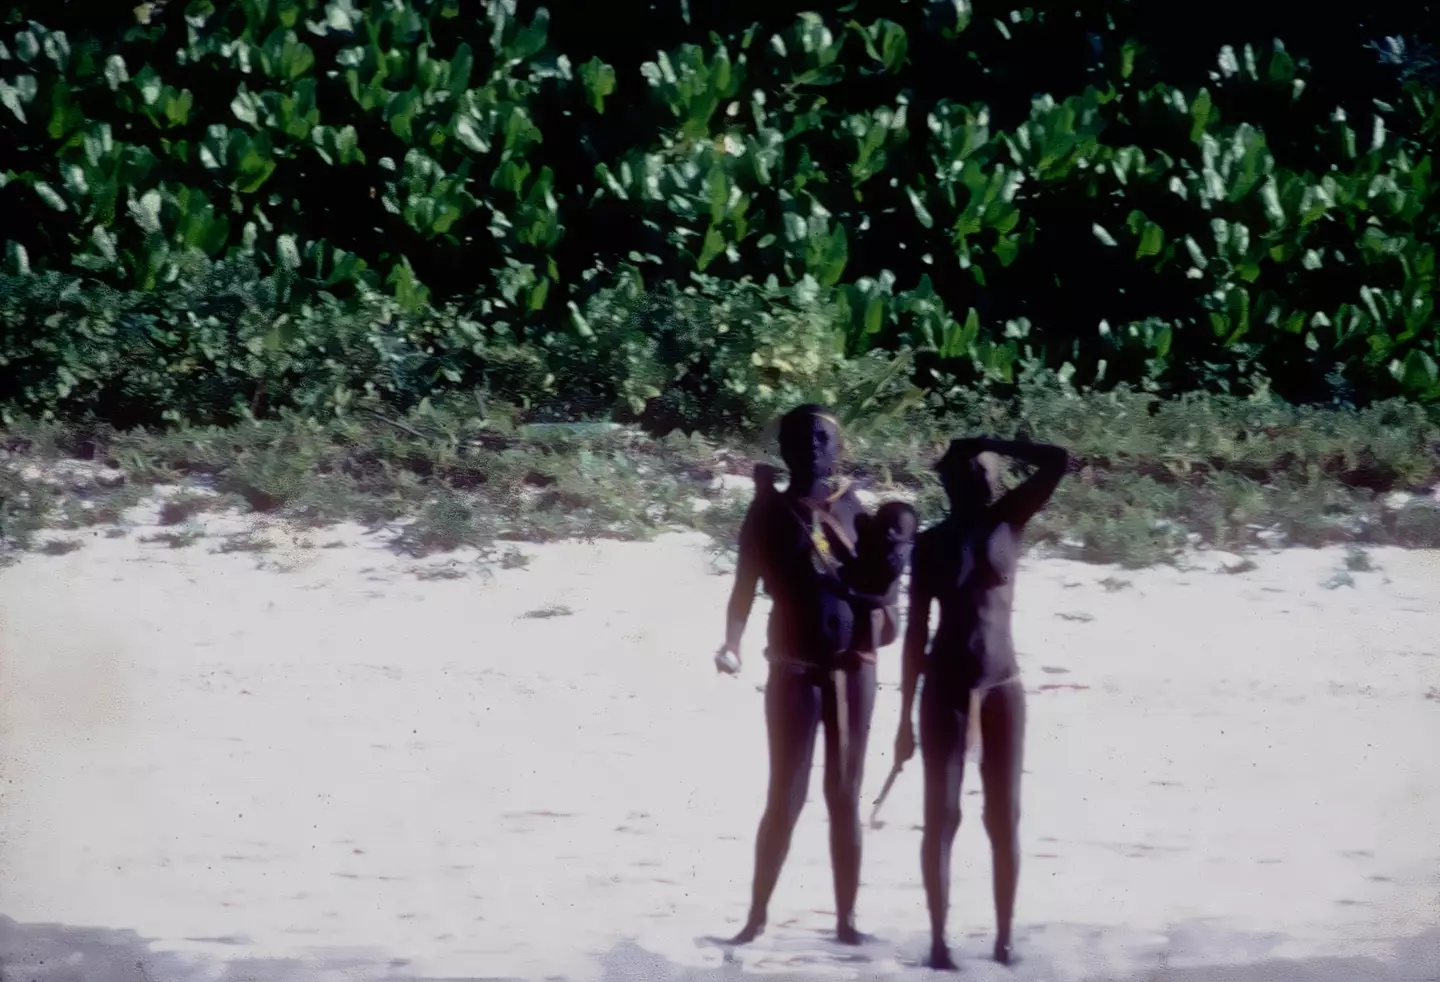 The Sentinelese are known to be notoriously hostile towards visitors.